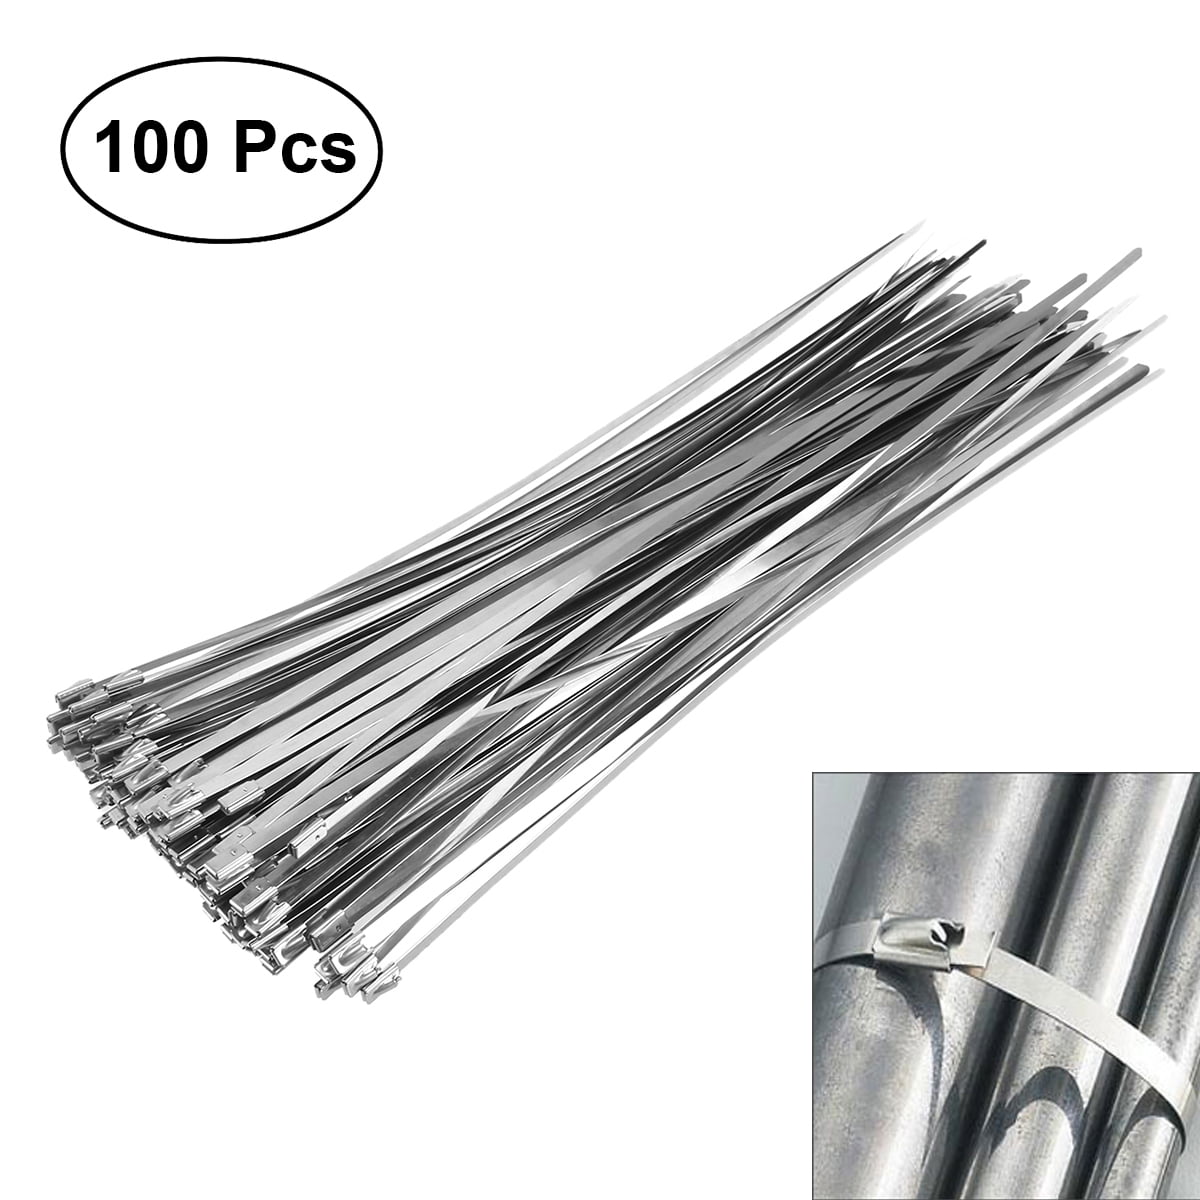 30 Inch Stainless Steel Cable Zip Ties 0.18 Inch Width Metal Exhaust Wrap 10pcs 